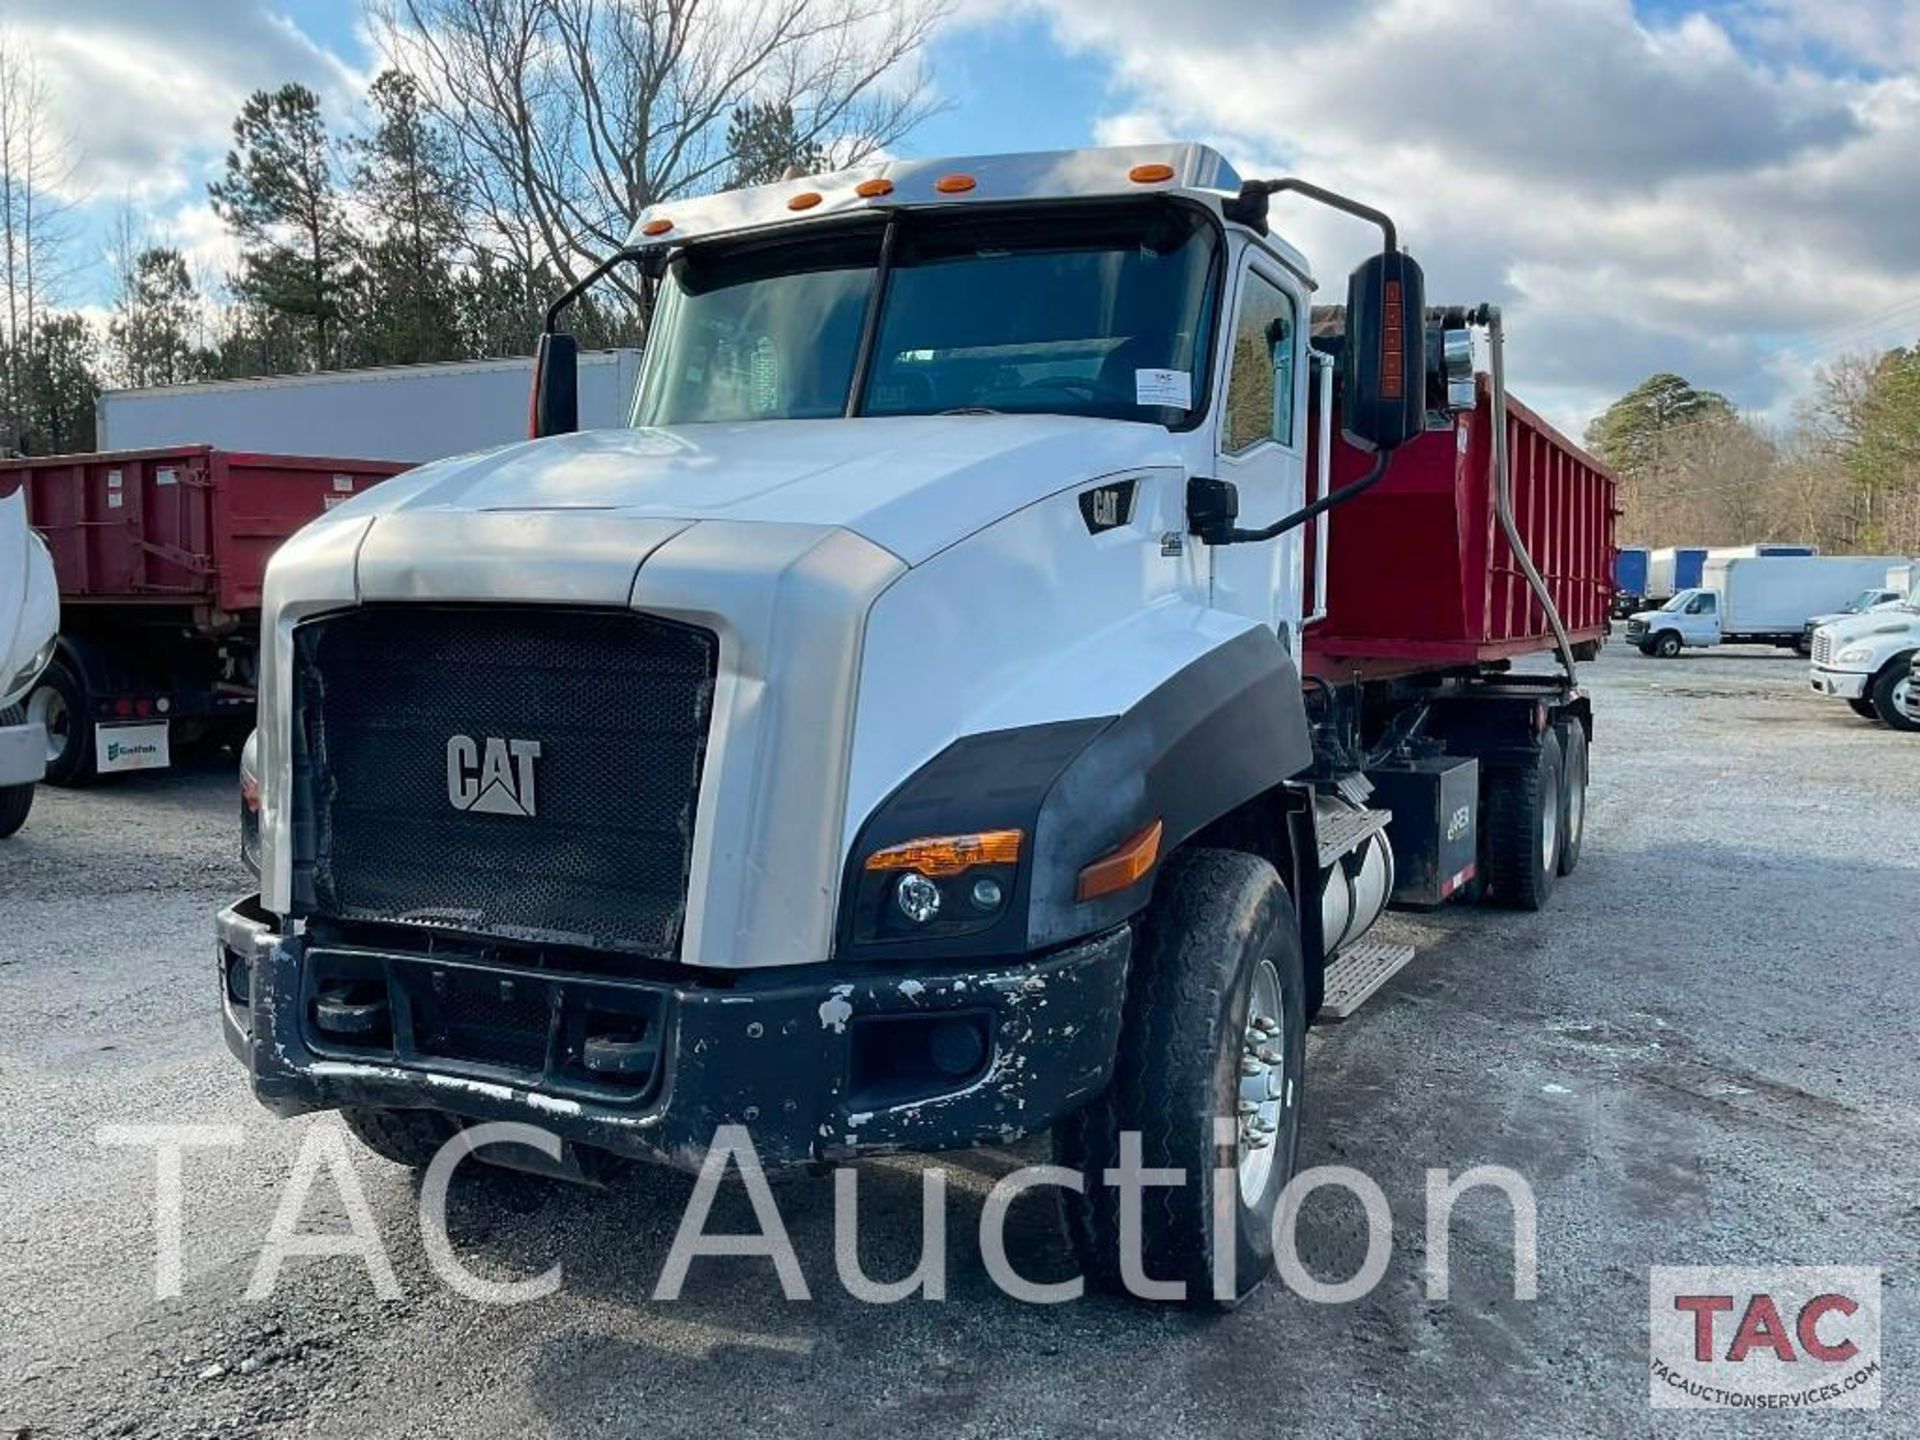 2012 CAT CT660S Roll-Off Truck W/ 20yd Dumpster - Image 14 of 148